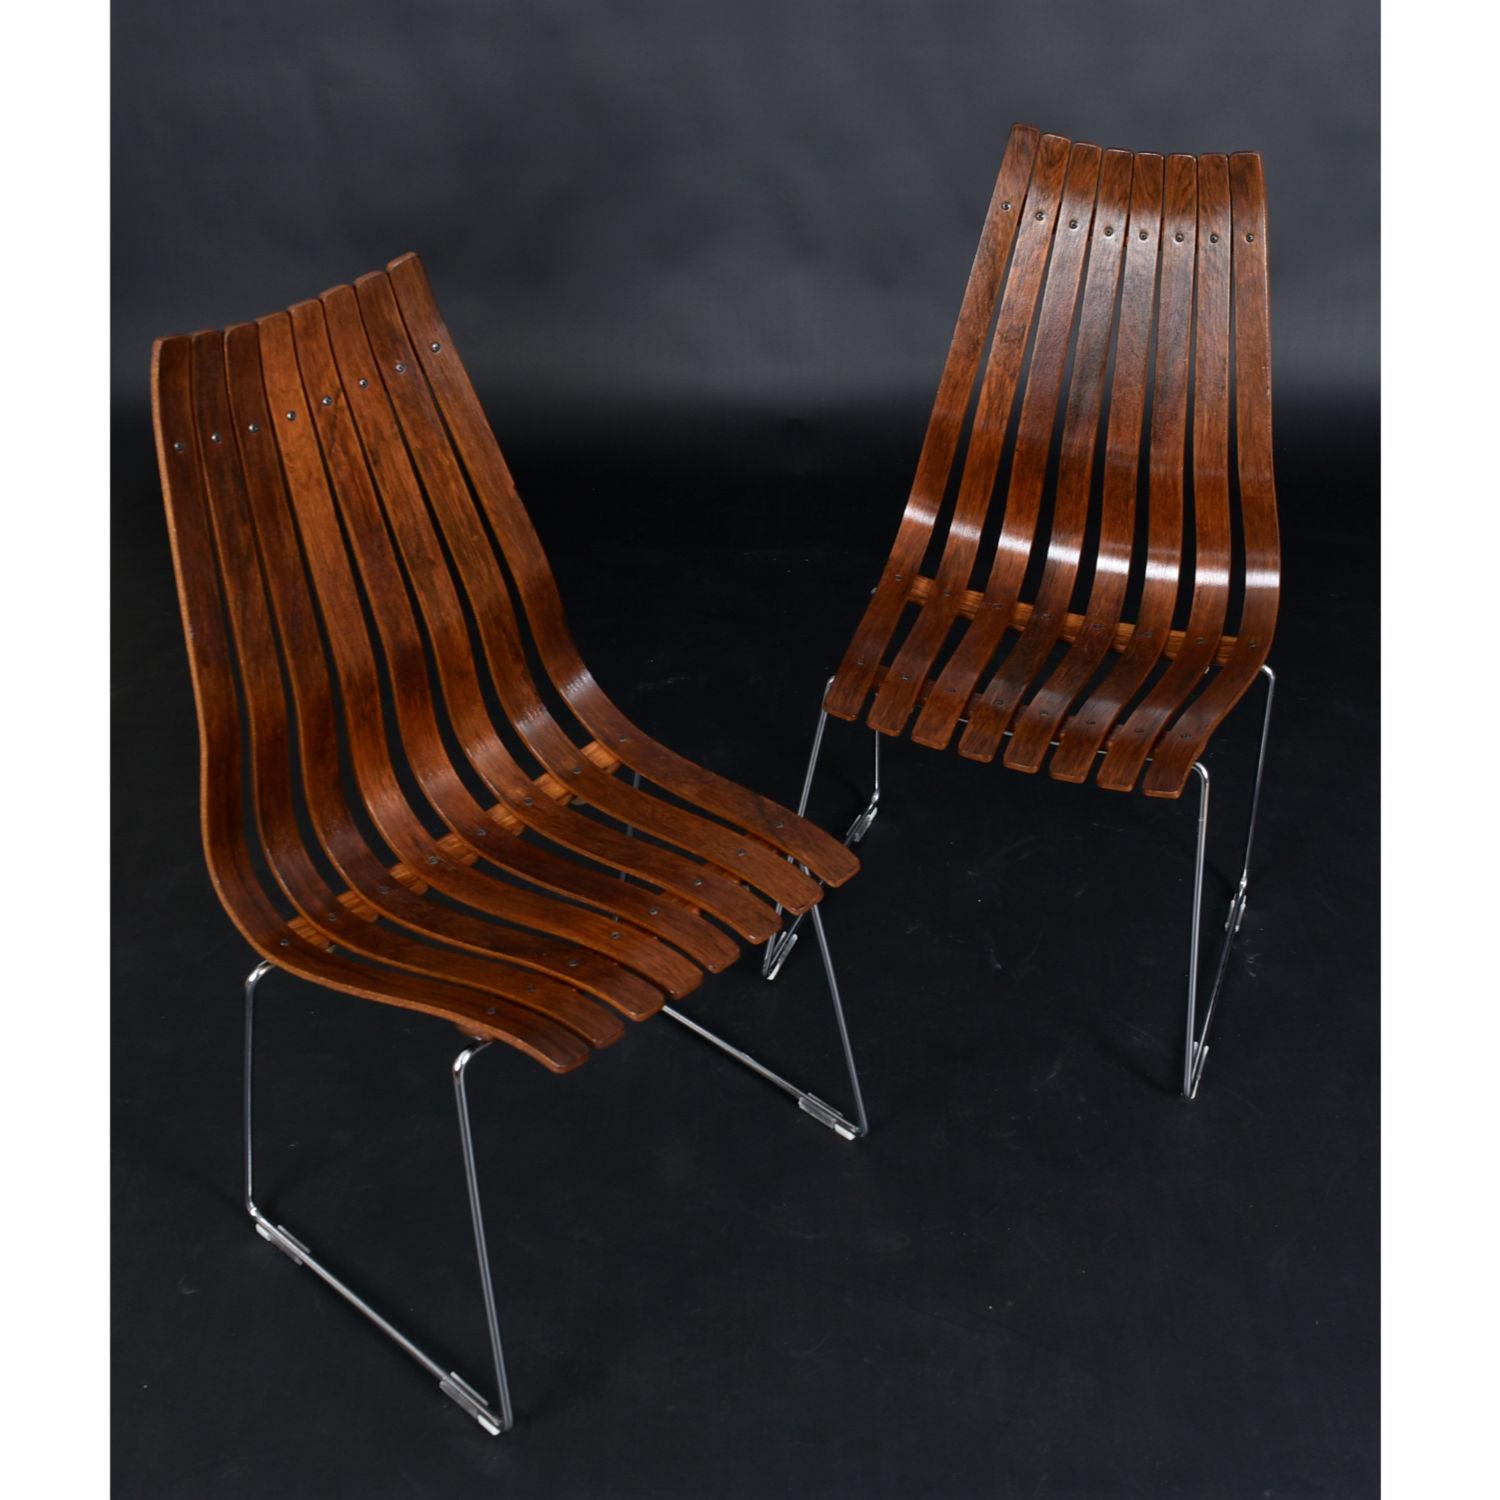 Rosewood slat back Hans Brattrud for Hove Mobler dining chairs. The chairs are sold as a pair. Designed in the late 1950s, this impeccable design has withstood the test of time. Crafted from an array of ergonomically contoured rosewood slats. These